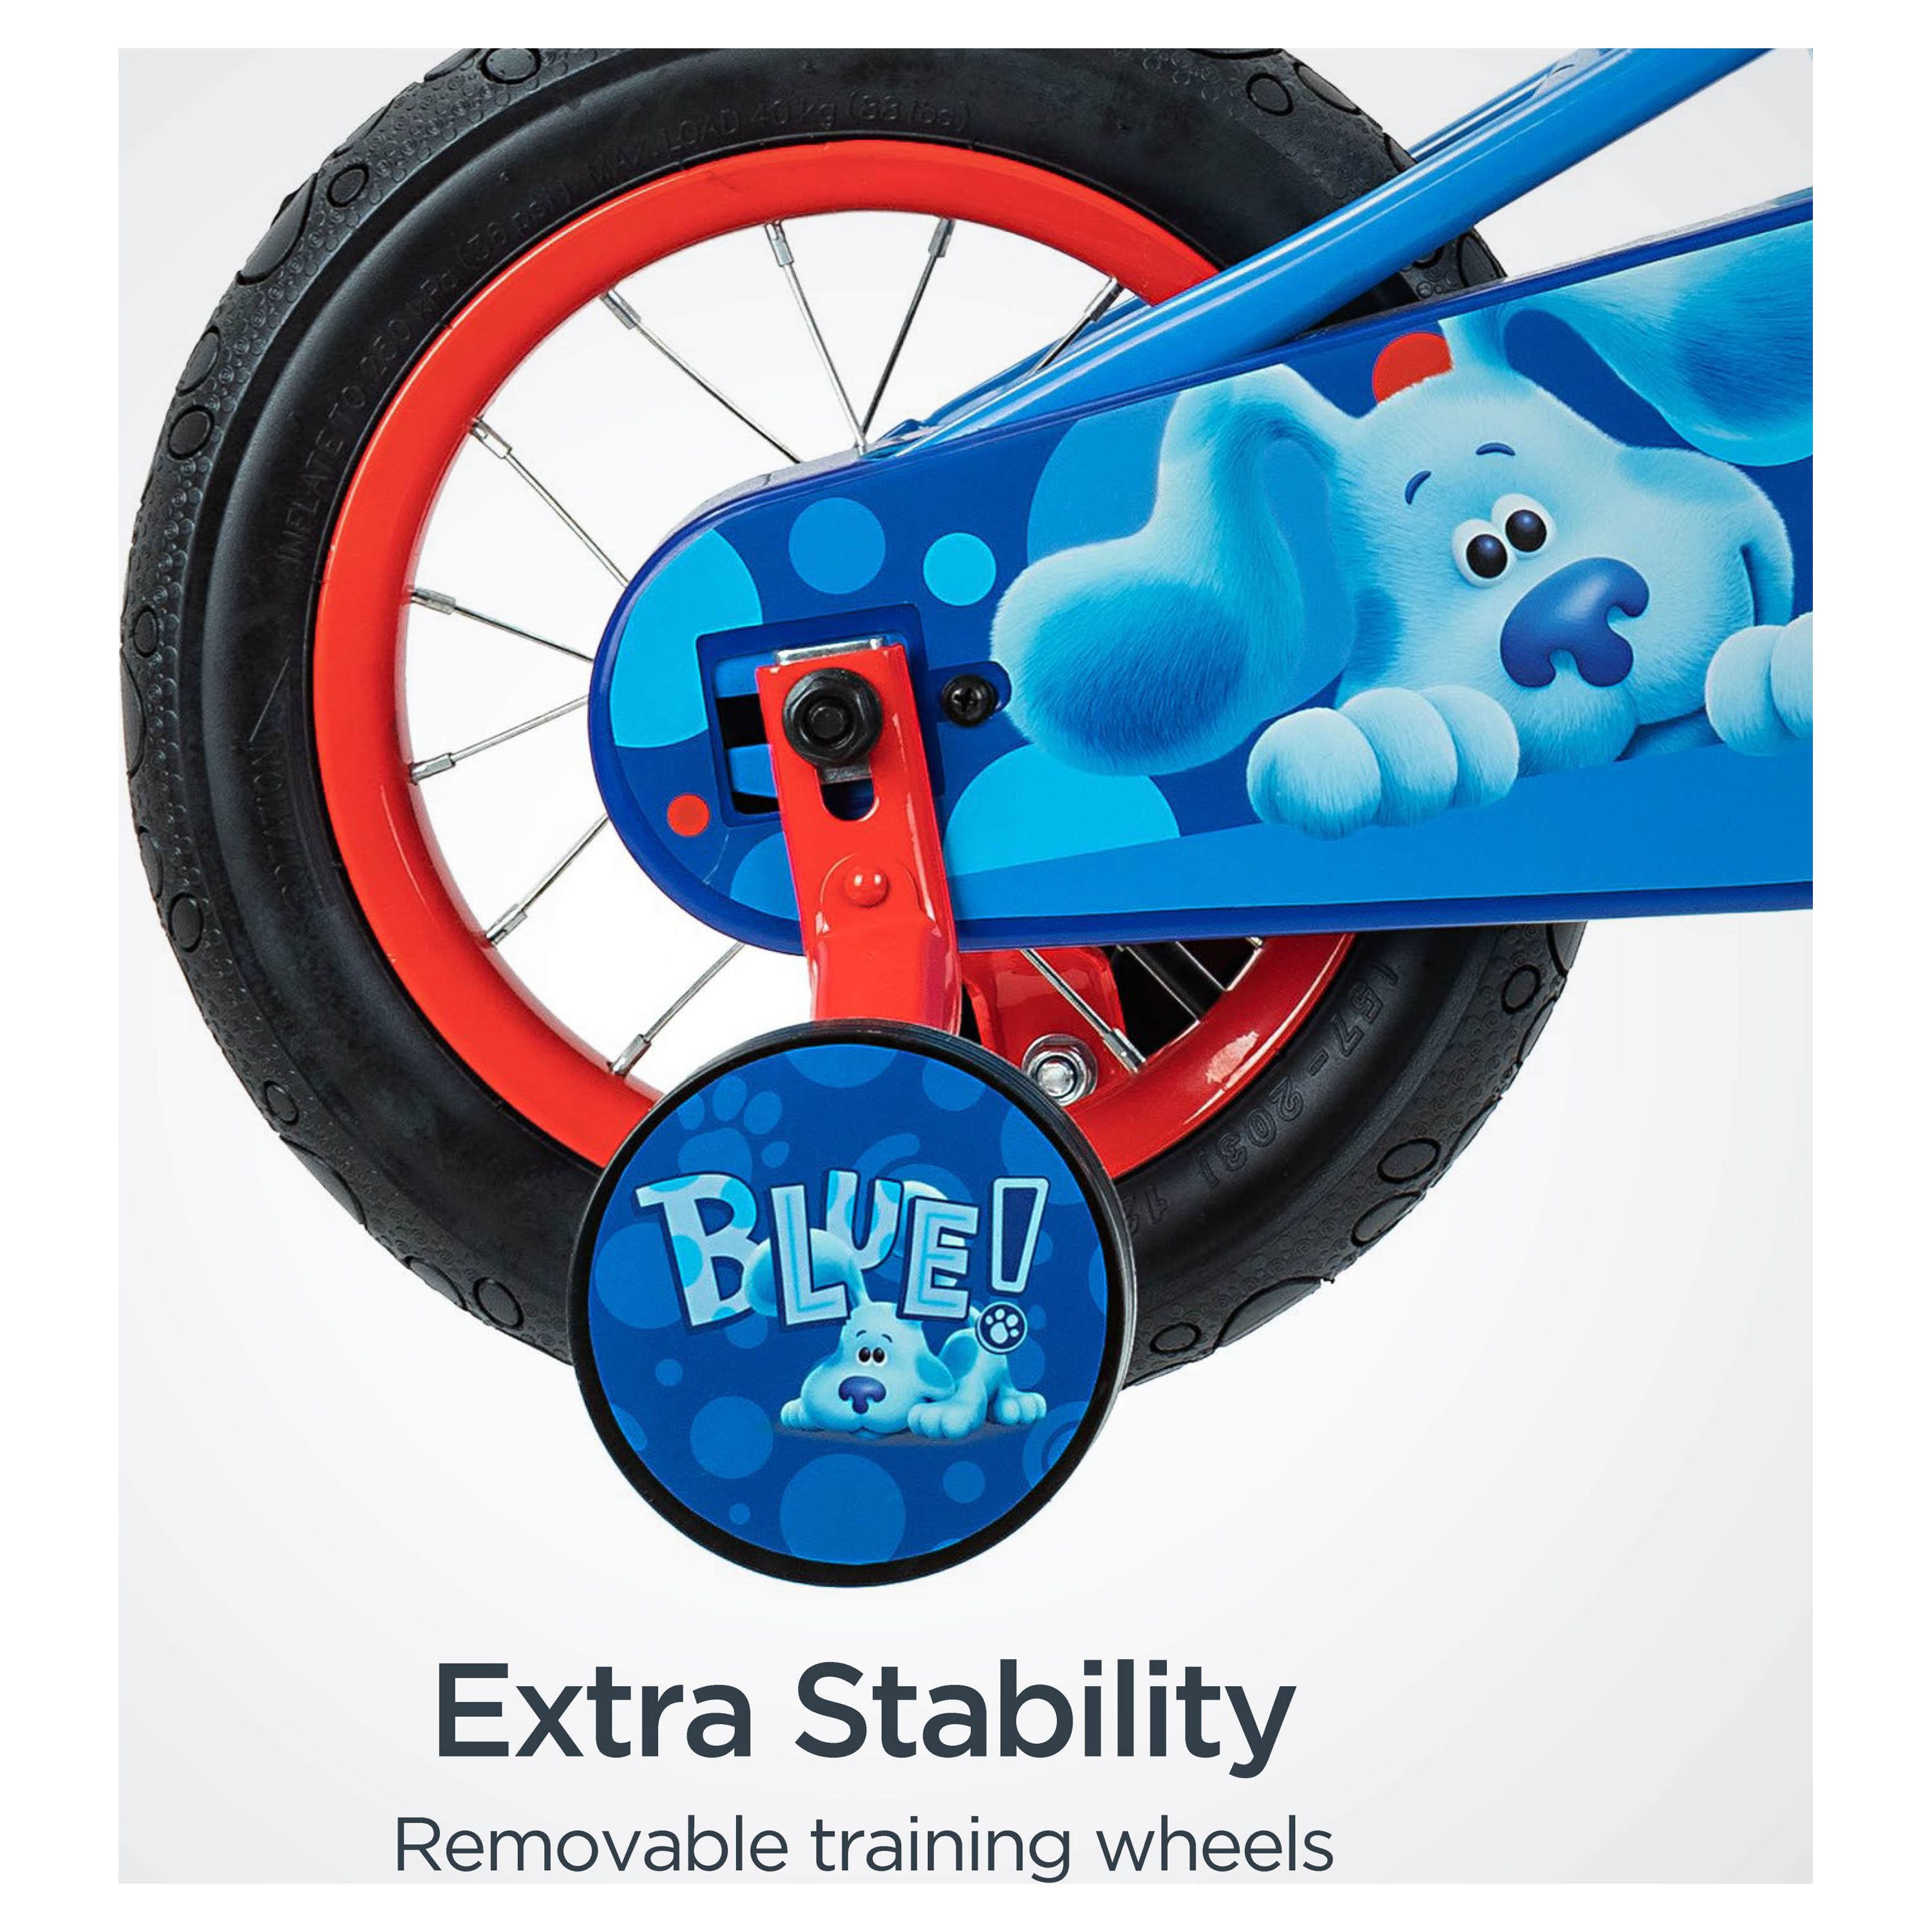 Nickelodeon Blue's Clues Kids Bike, 12 -Inch Wheel, Ages 2 to 4, Blue - image 5 of 9